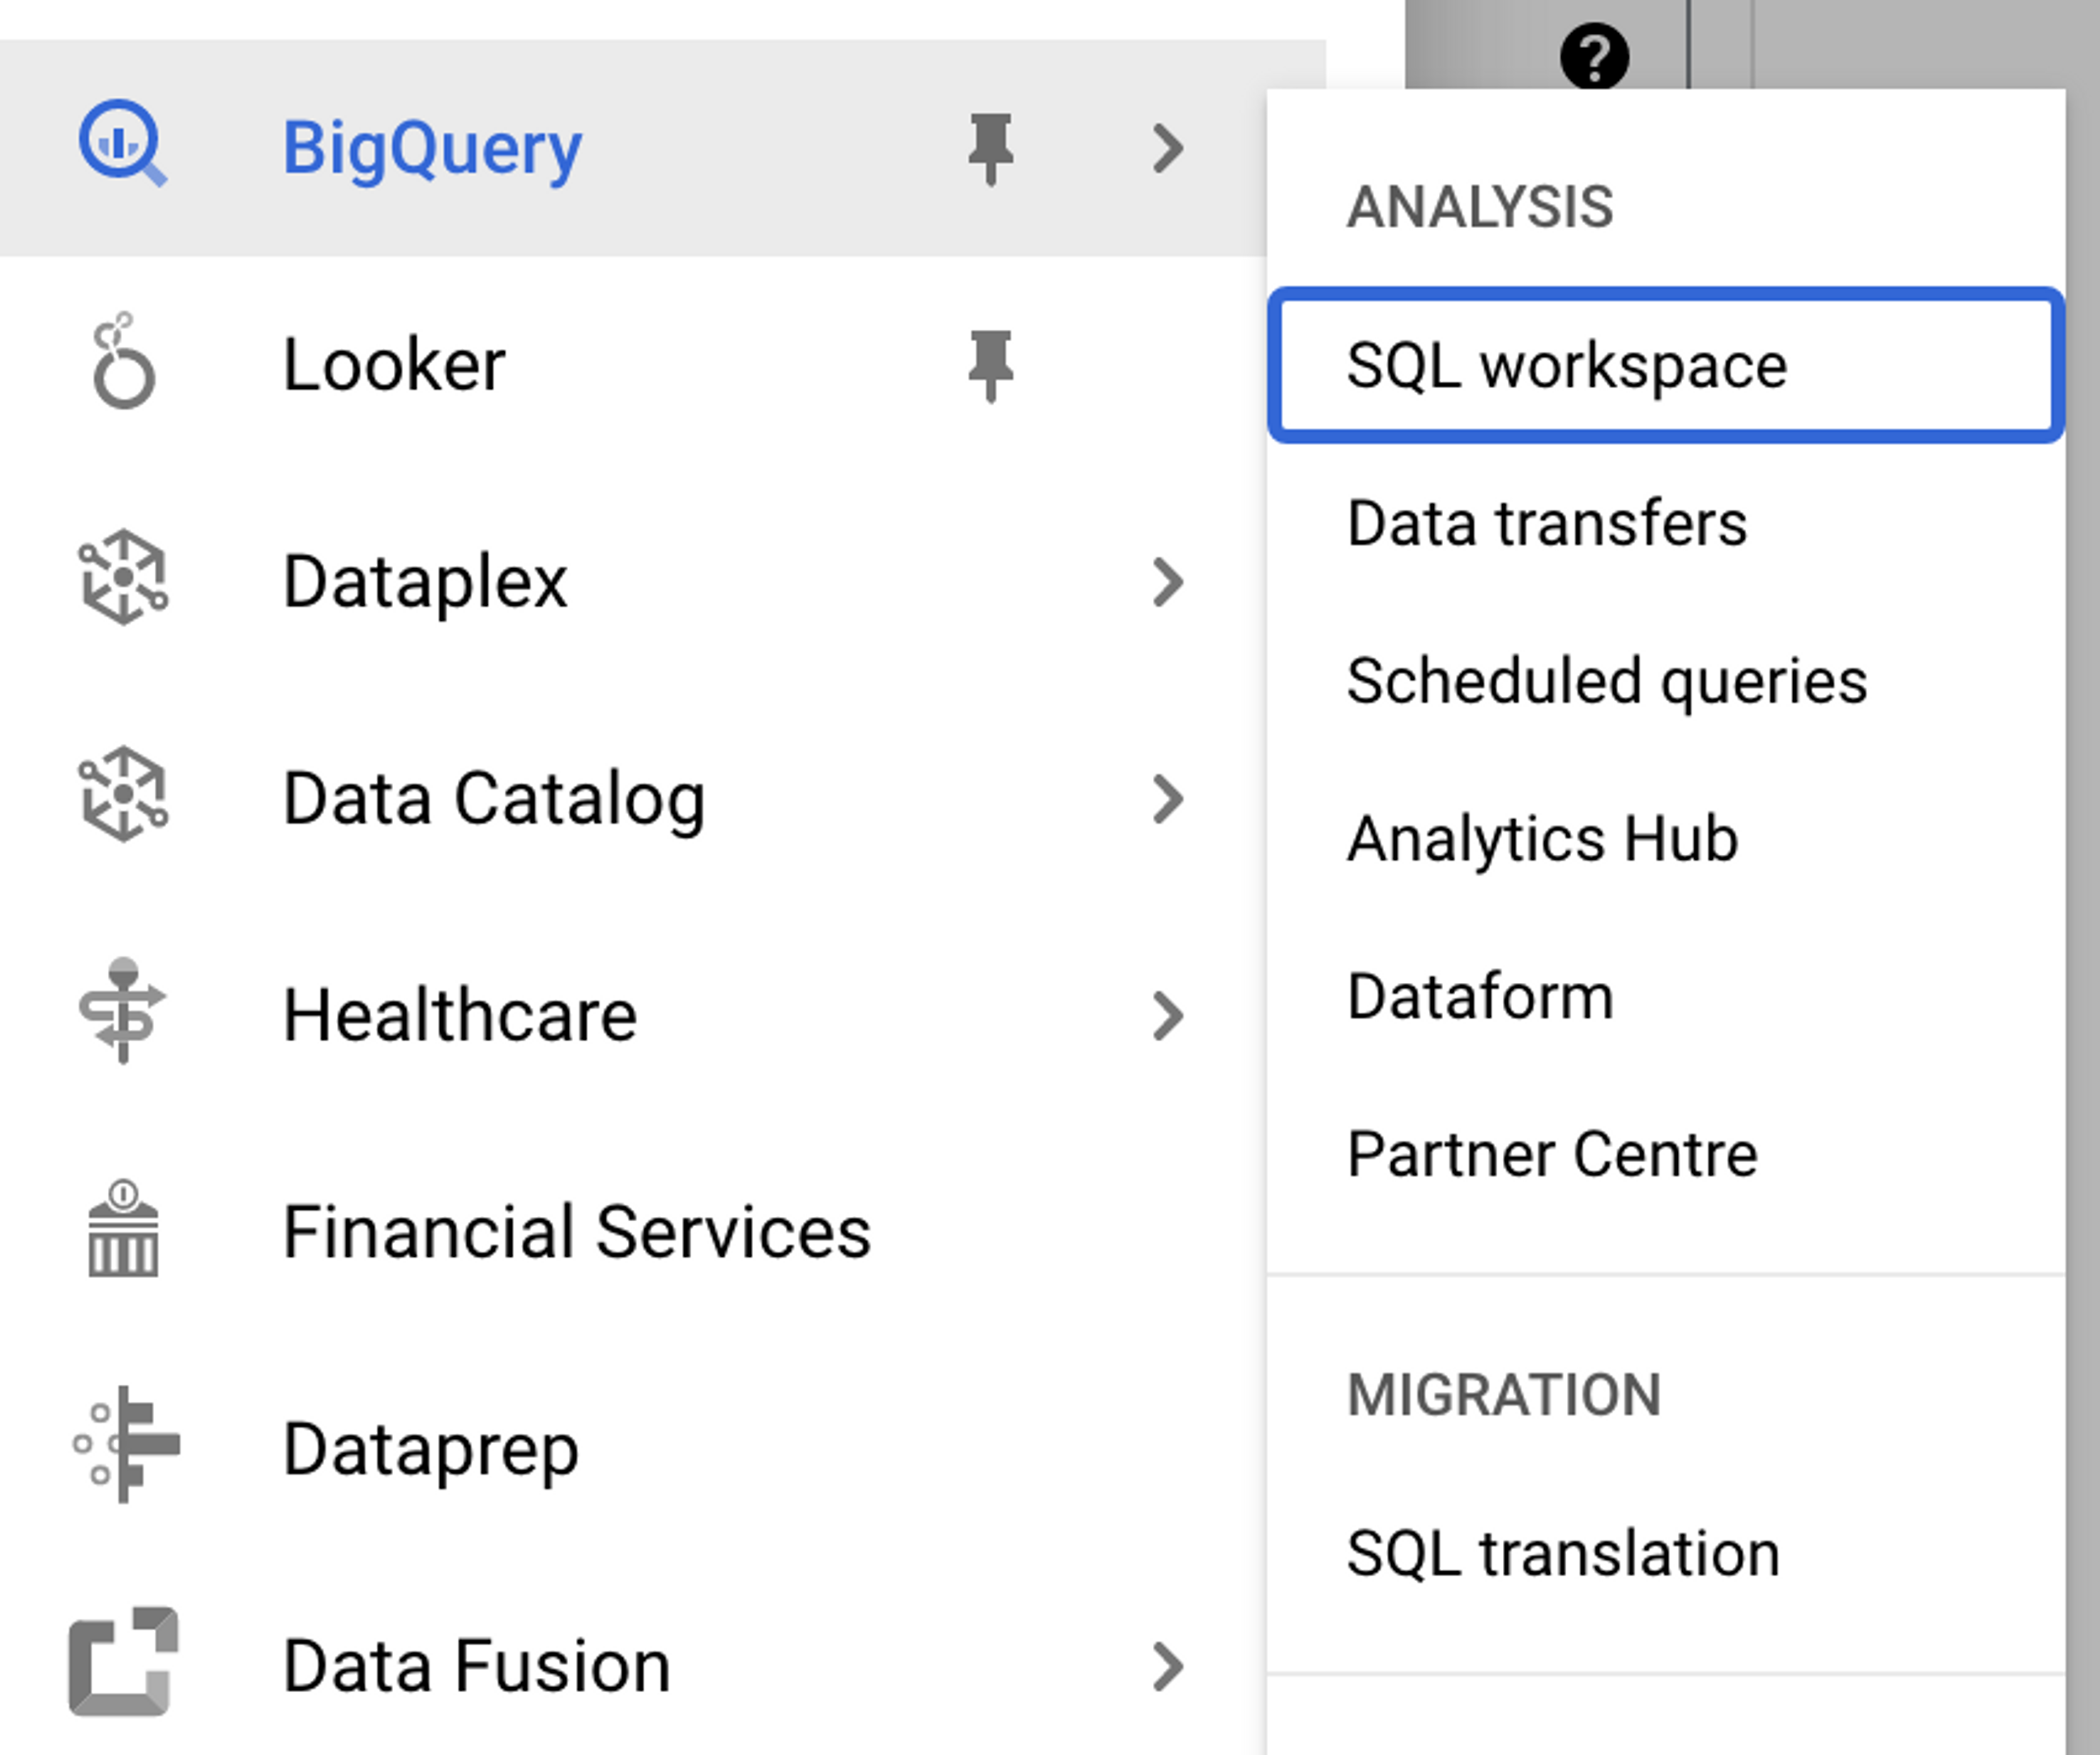 A screenshot showing the location of the SQL workspace submenu item within the BigQuery parent menu